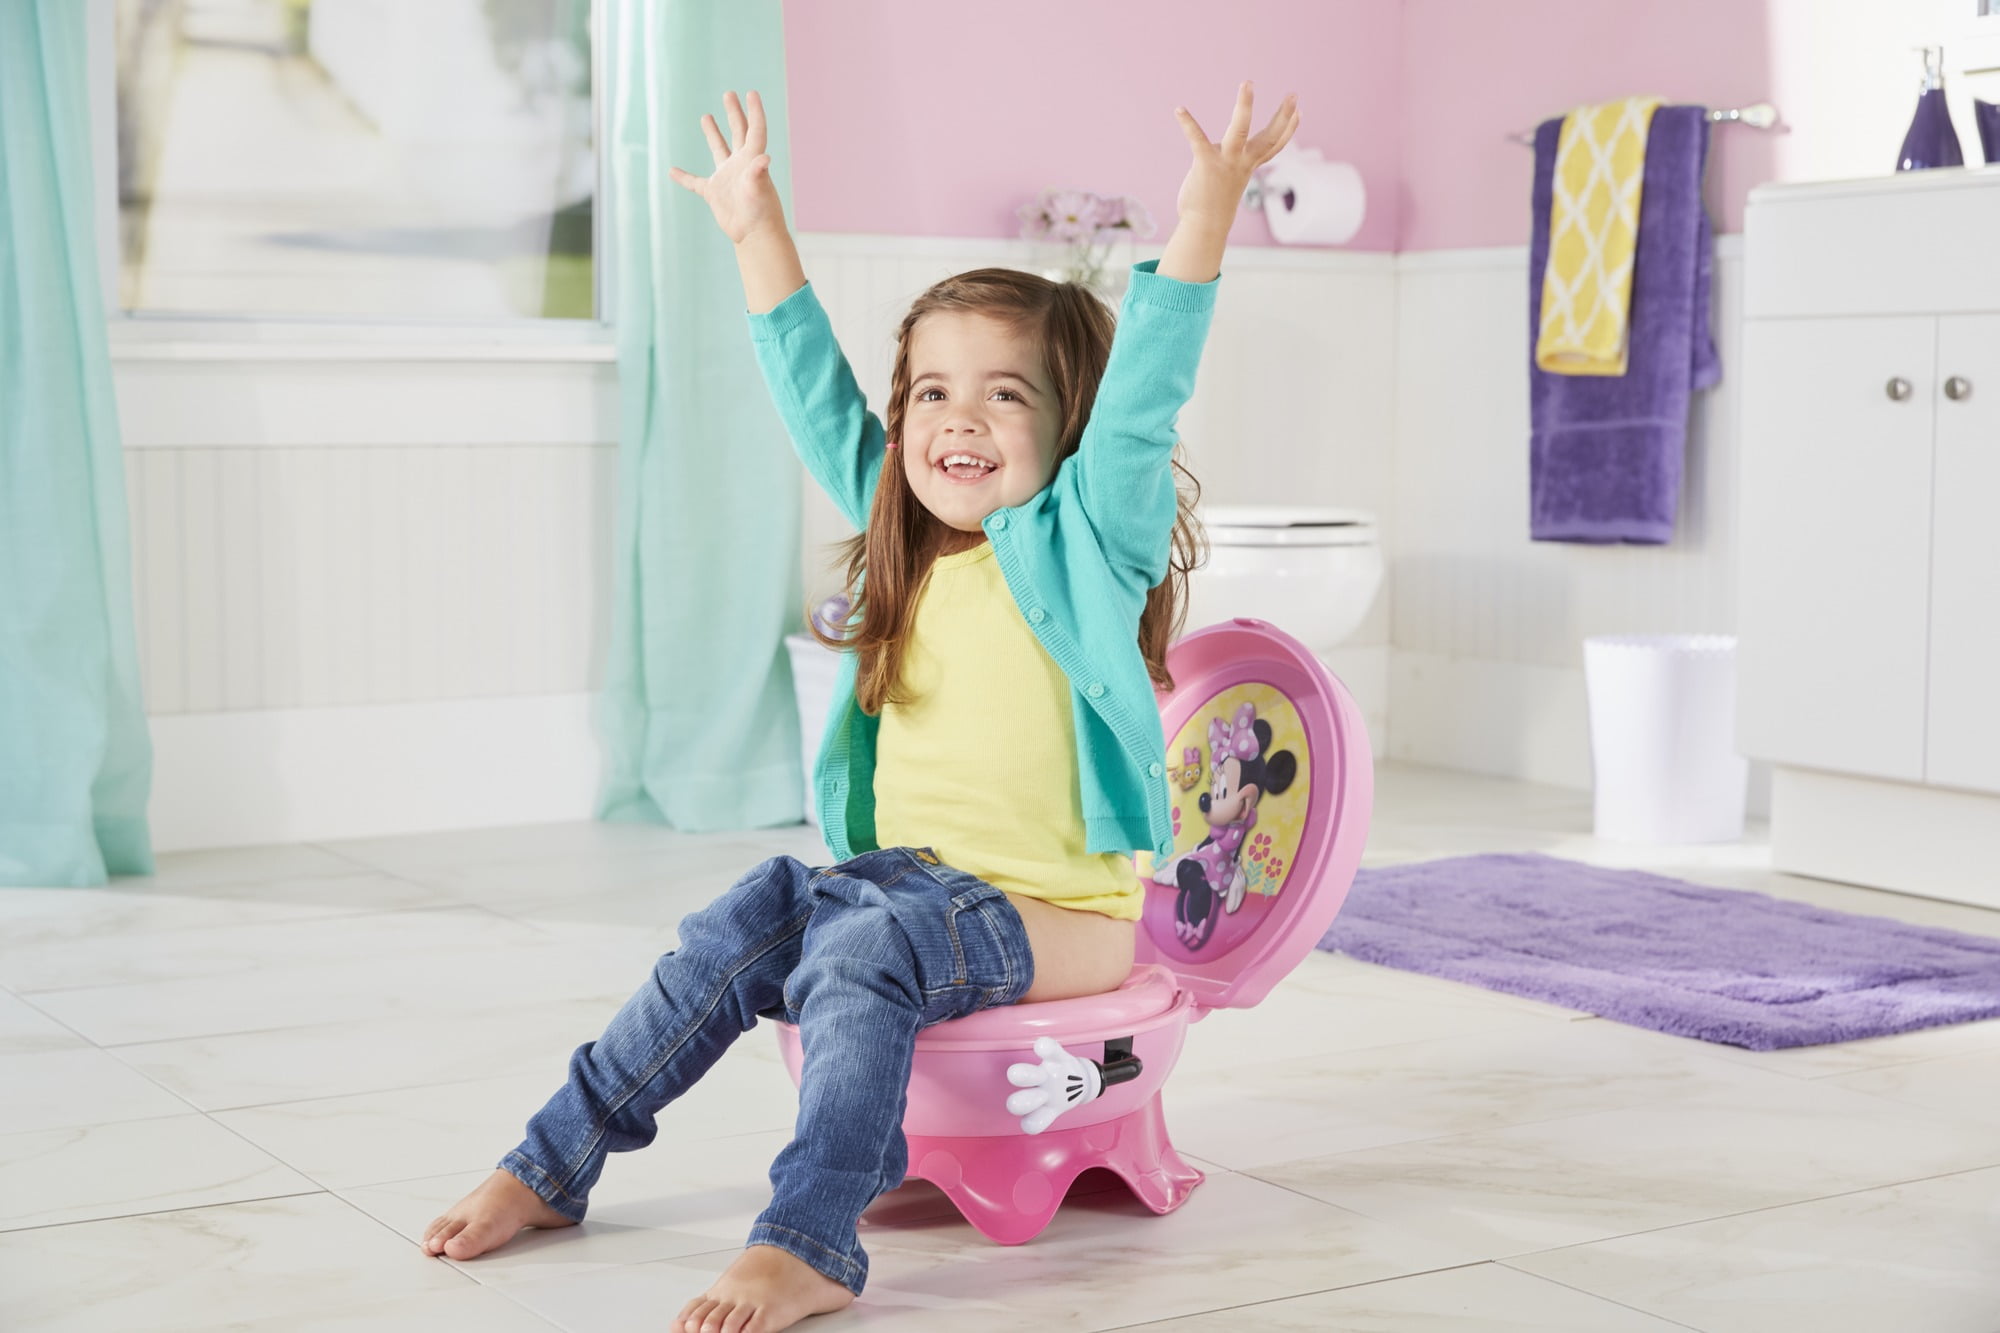 Tomy The First Years Potty Training Seat, Minnie Mouse